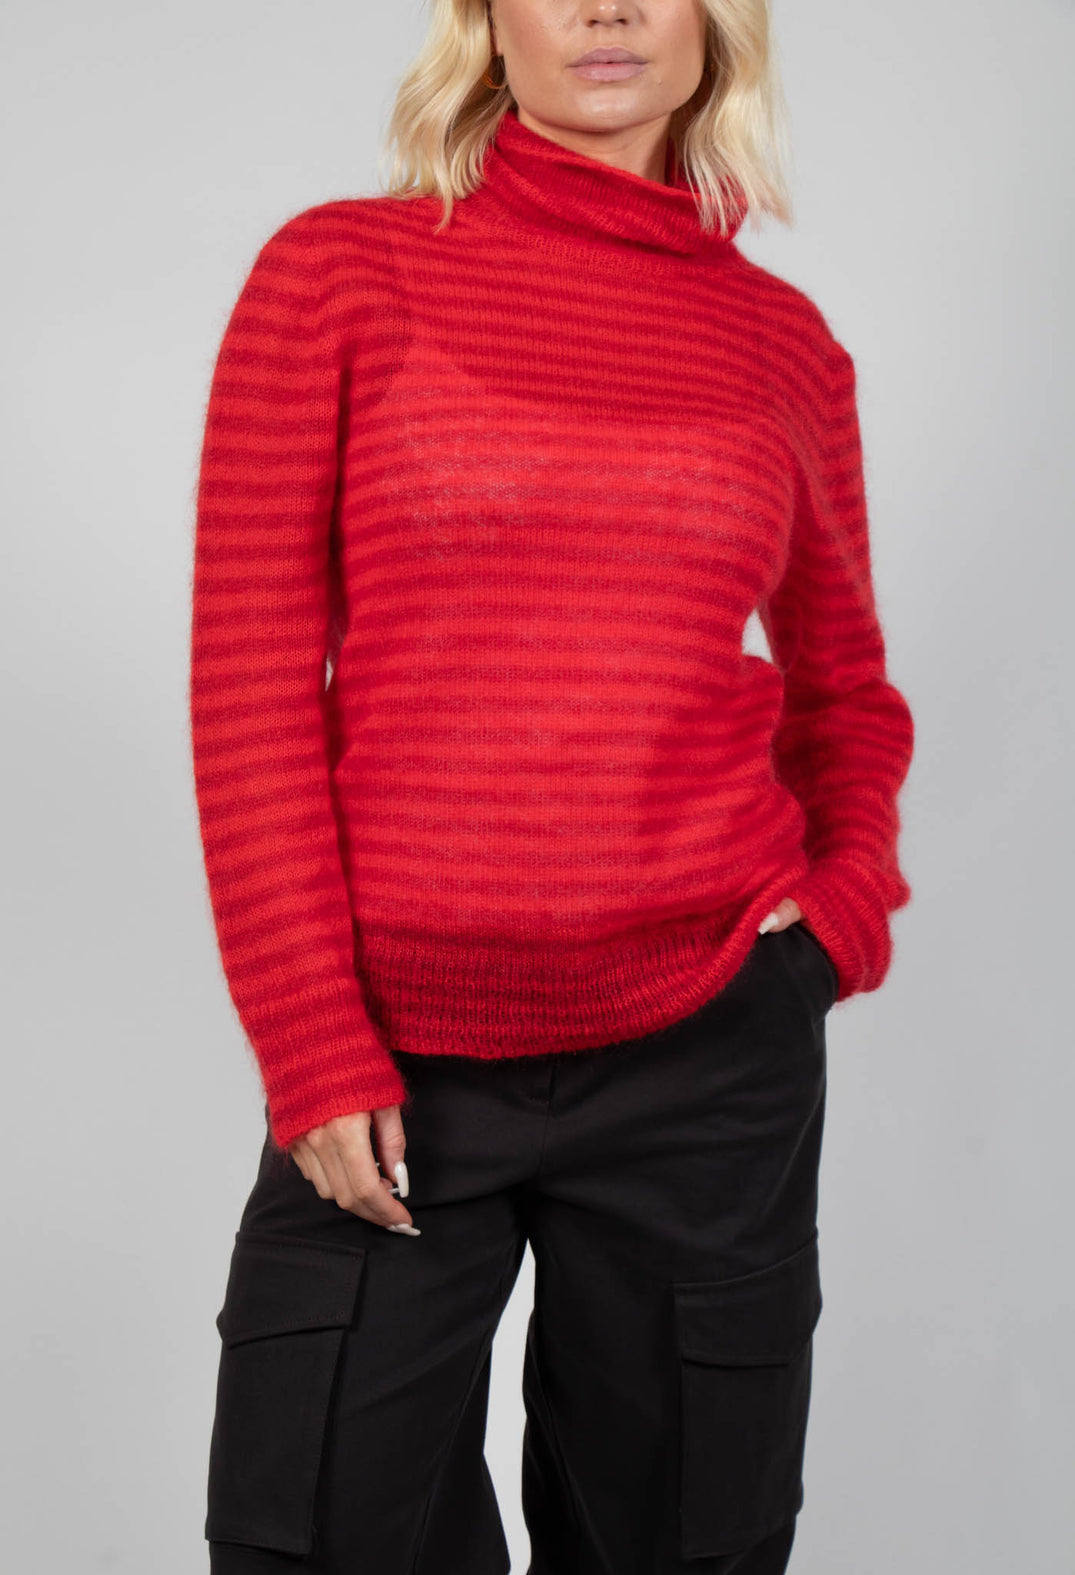 Striped Turtleneck Sweater in Adrenaline Red